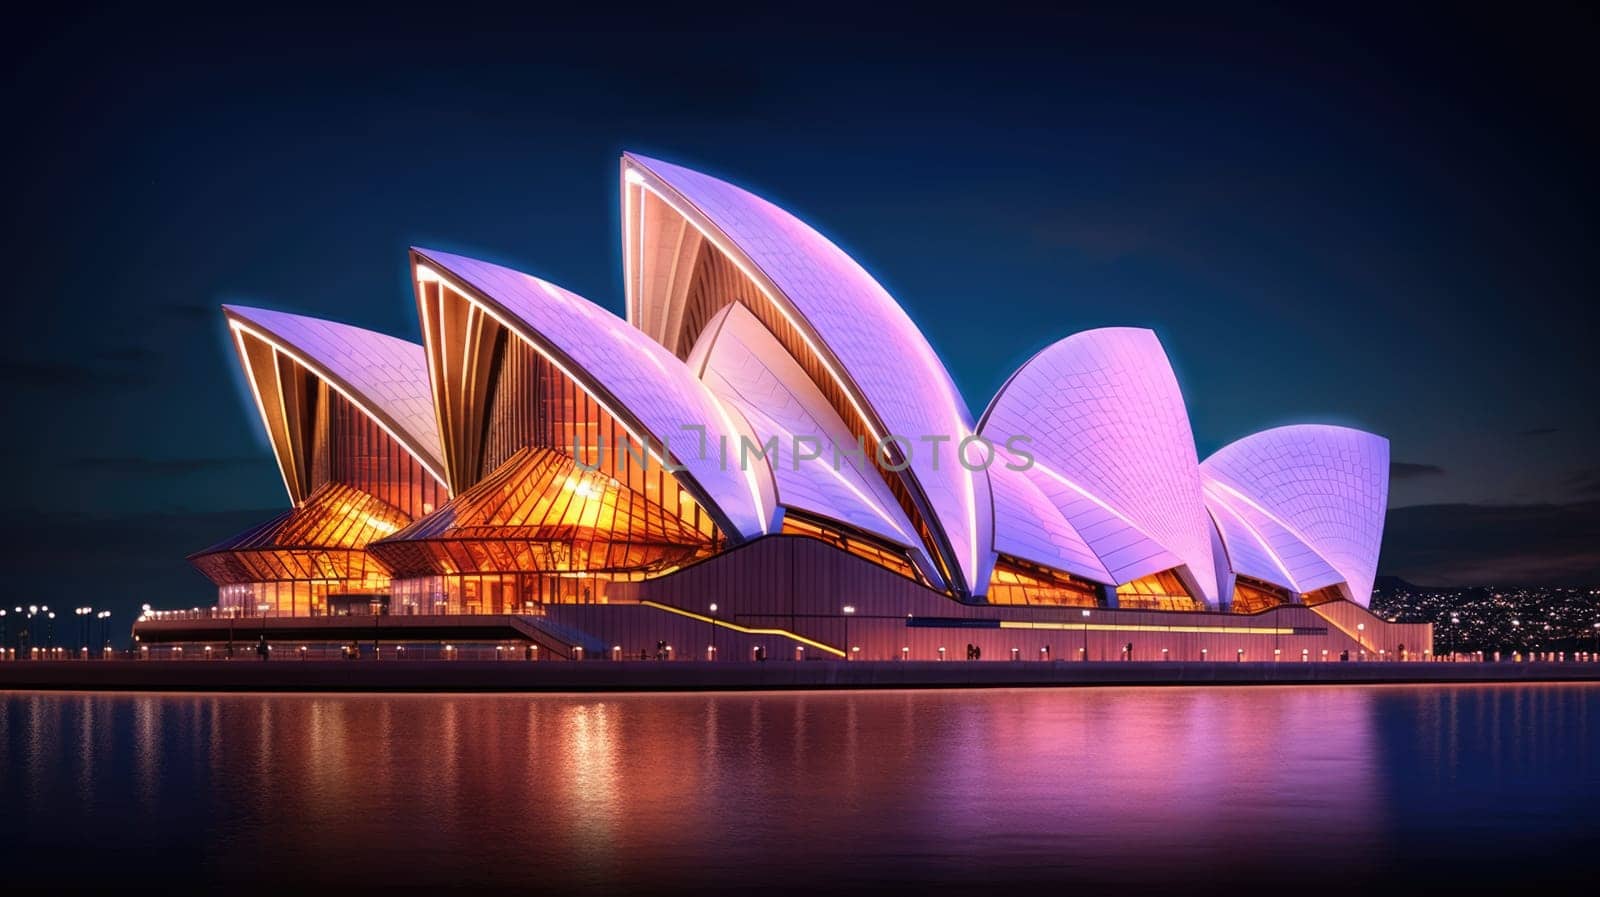 Modern architecture of Sydney Opera House illuminated at night with neon lights by JuliaDorian